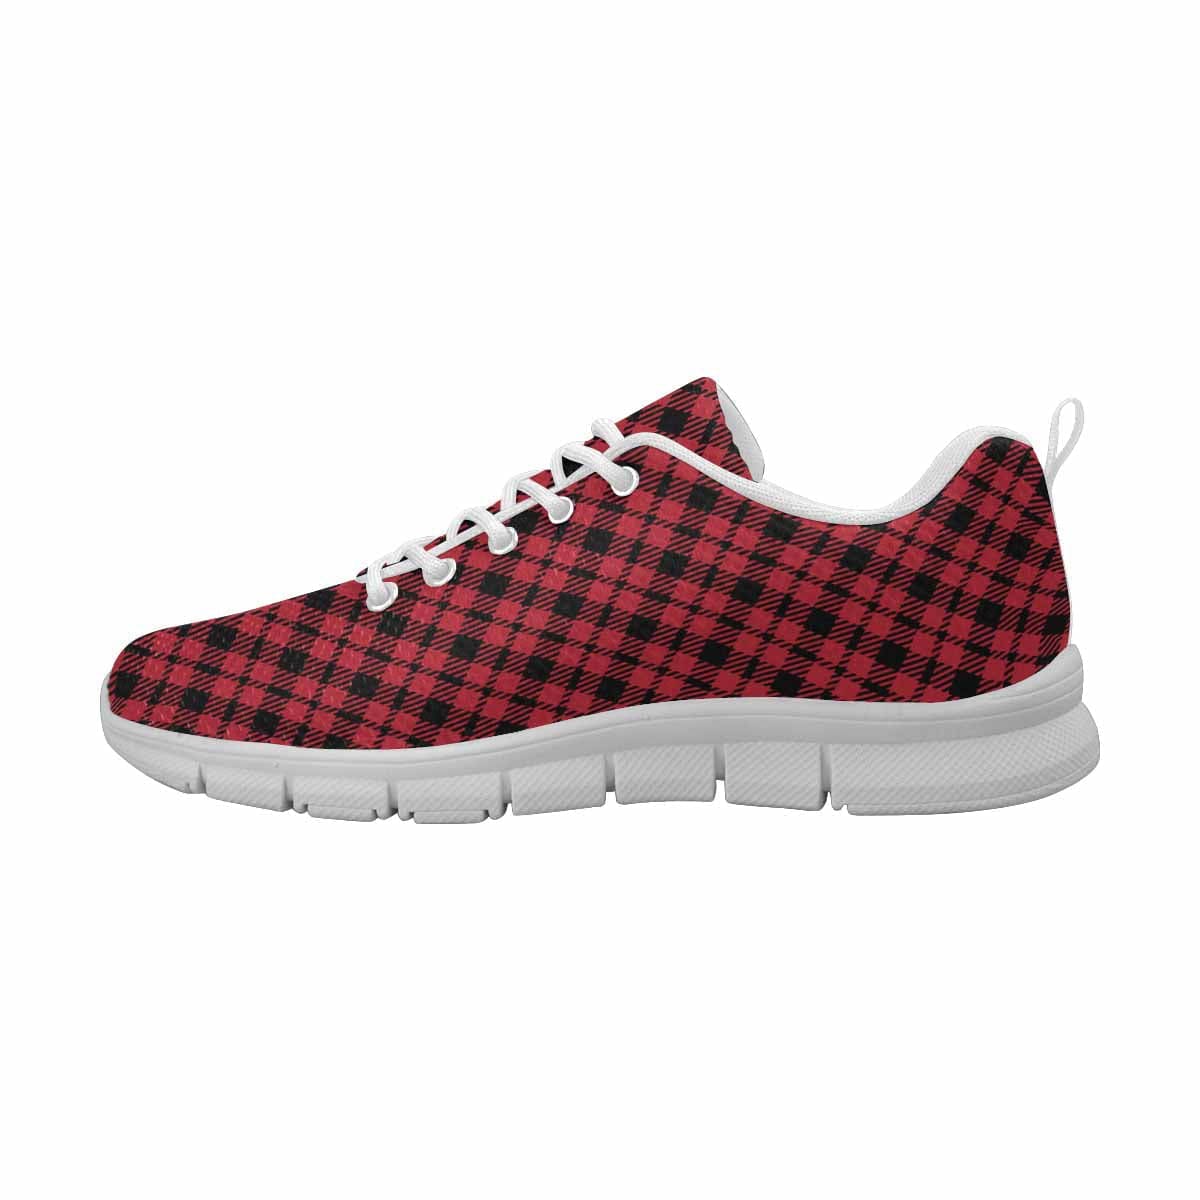 Sneakers For Men Buffalo Plaid Red And Black - Running Shoes Dg841 - Mens |